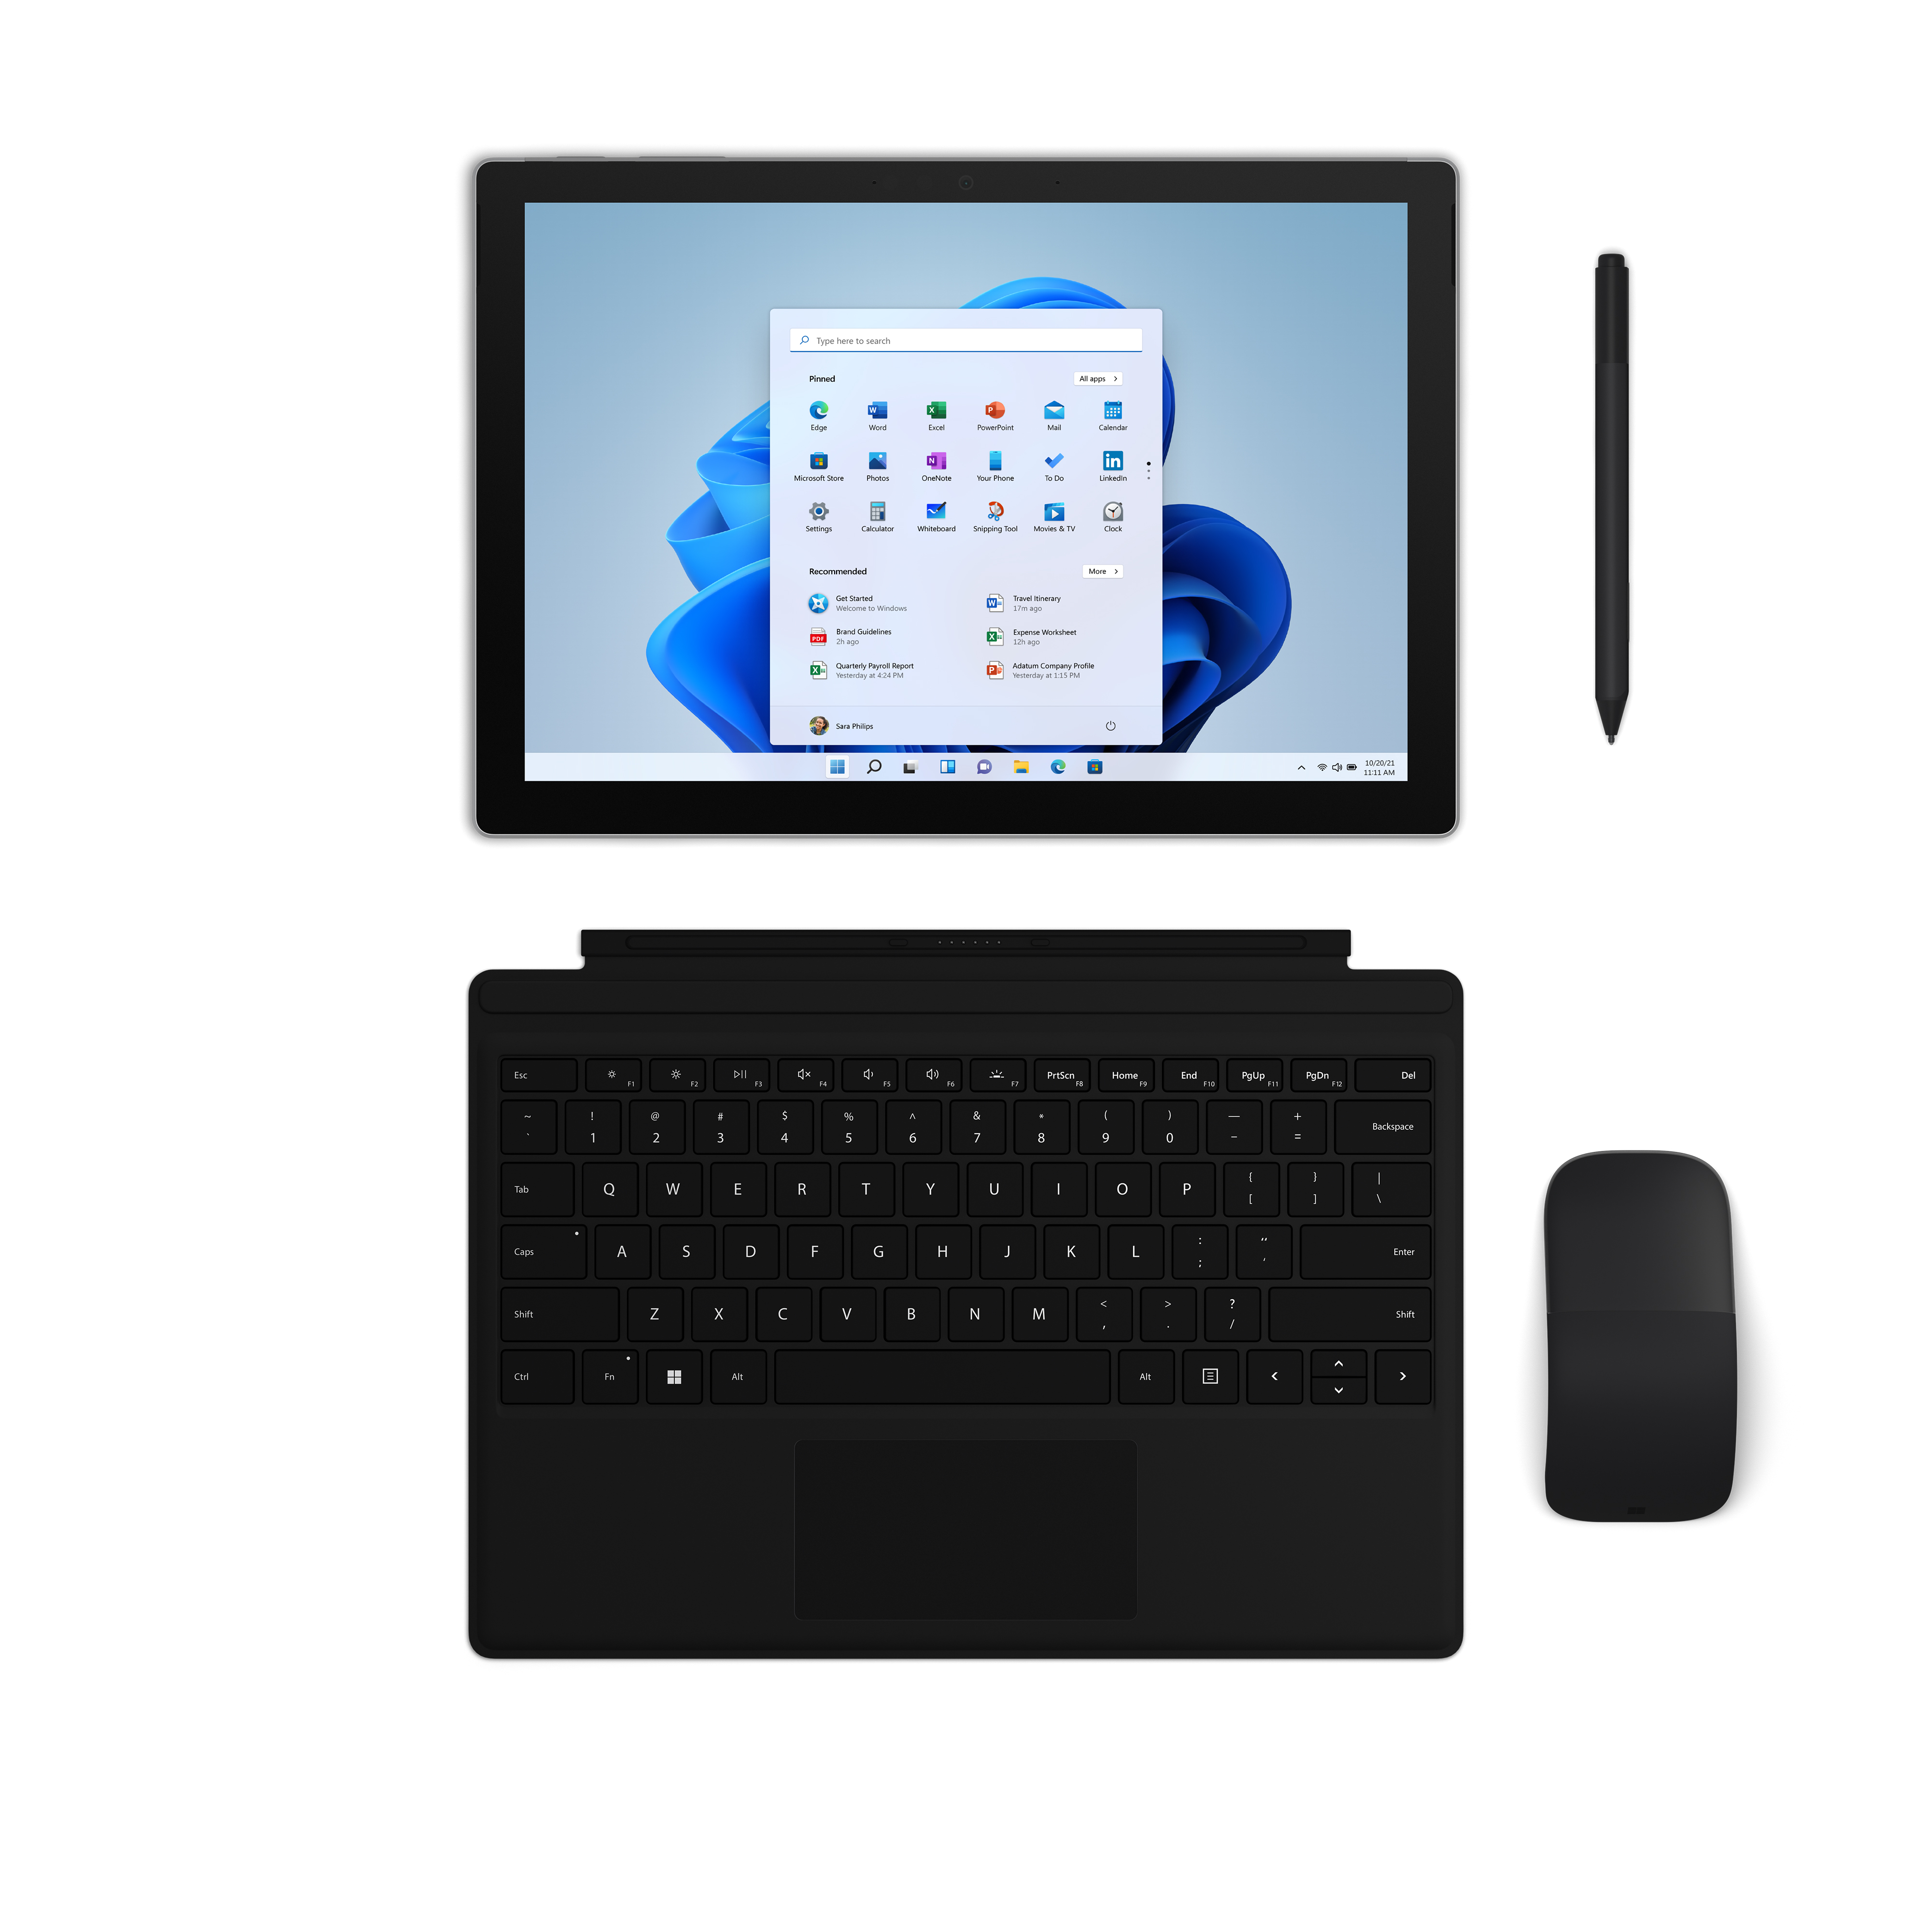 Microsoft Surface Pro 7+ 2-In-1, 12.3" Touch Screen, Intel Core i3, 8GB RAM, 128GB SSD, Windows 11 Home, Platinum, with Black Type Cover - image 4 of 8